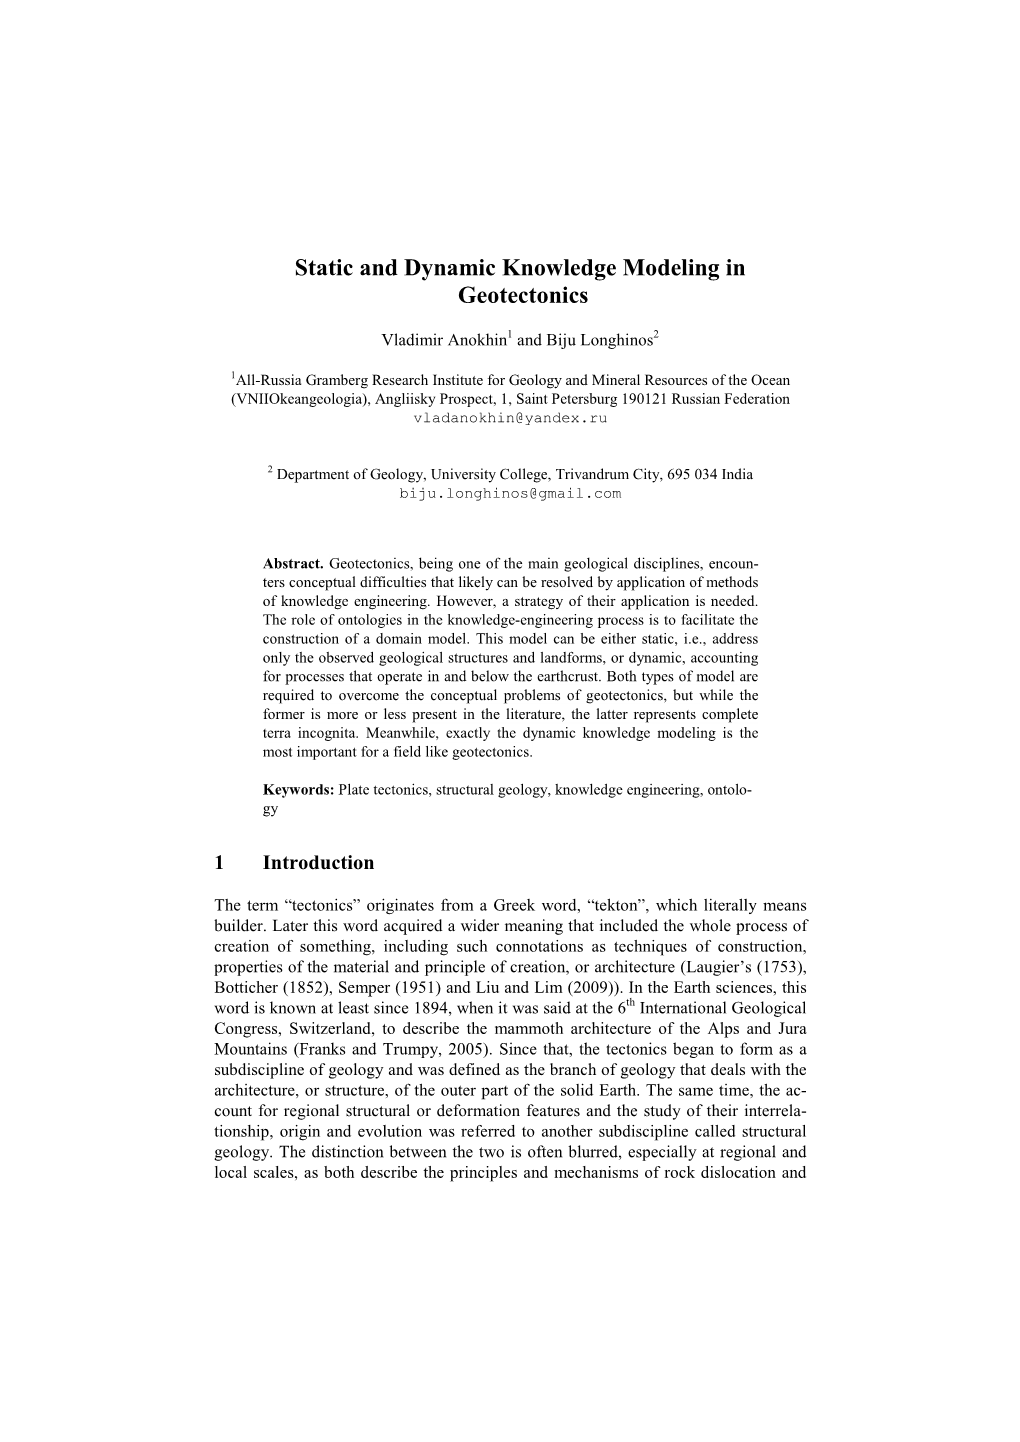 Static and Dynamic Knowledge Modeling in Geotectonics